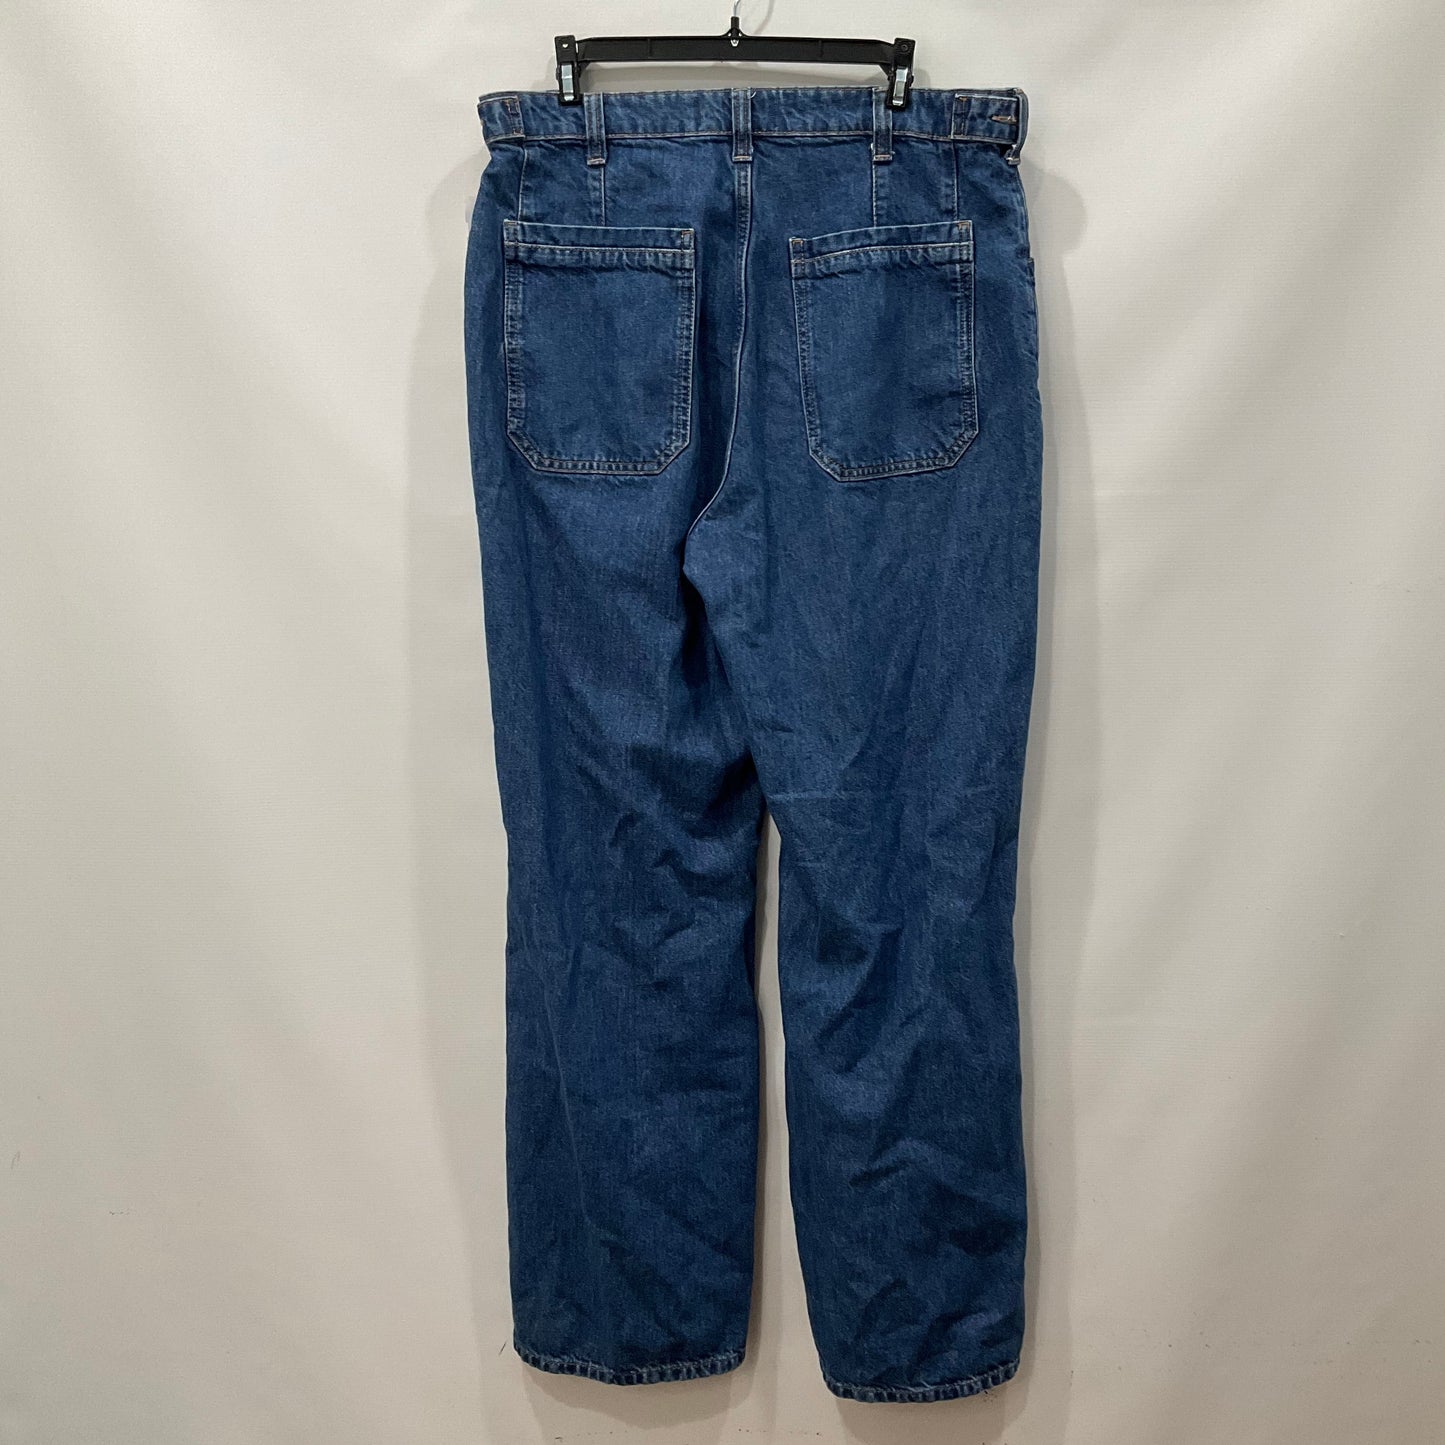 Blue Denim Jeans Straight We The Free, Size 12